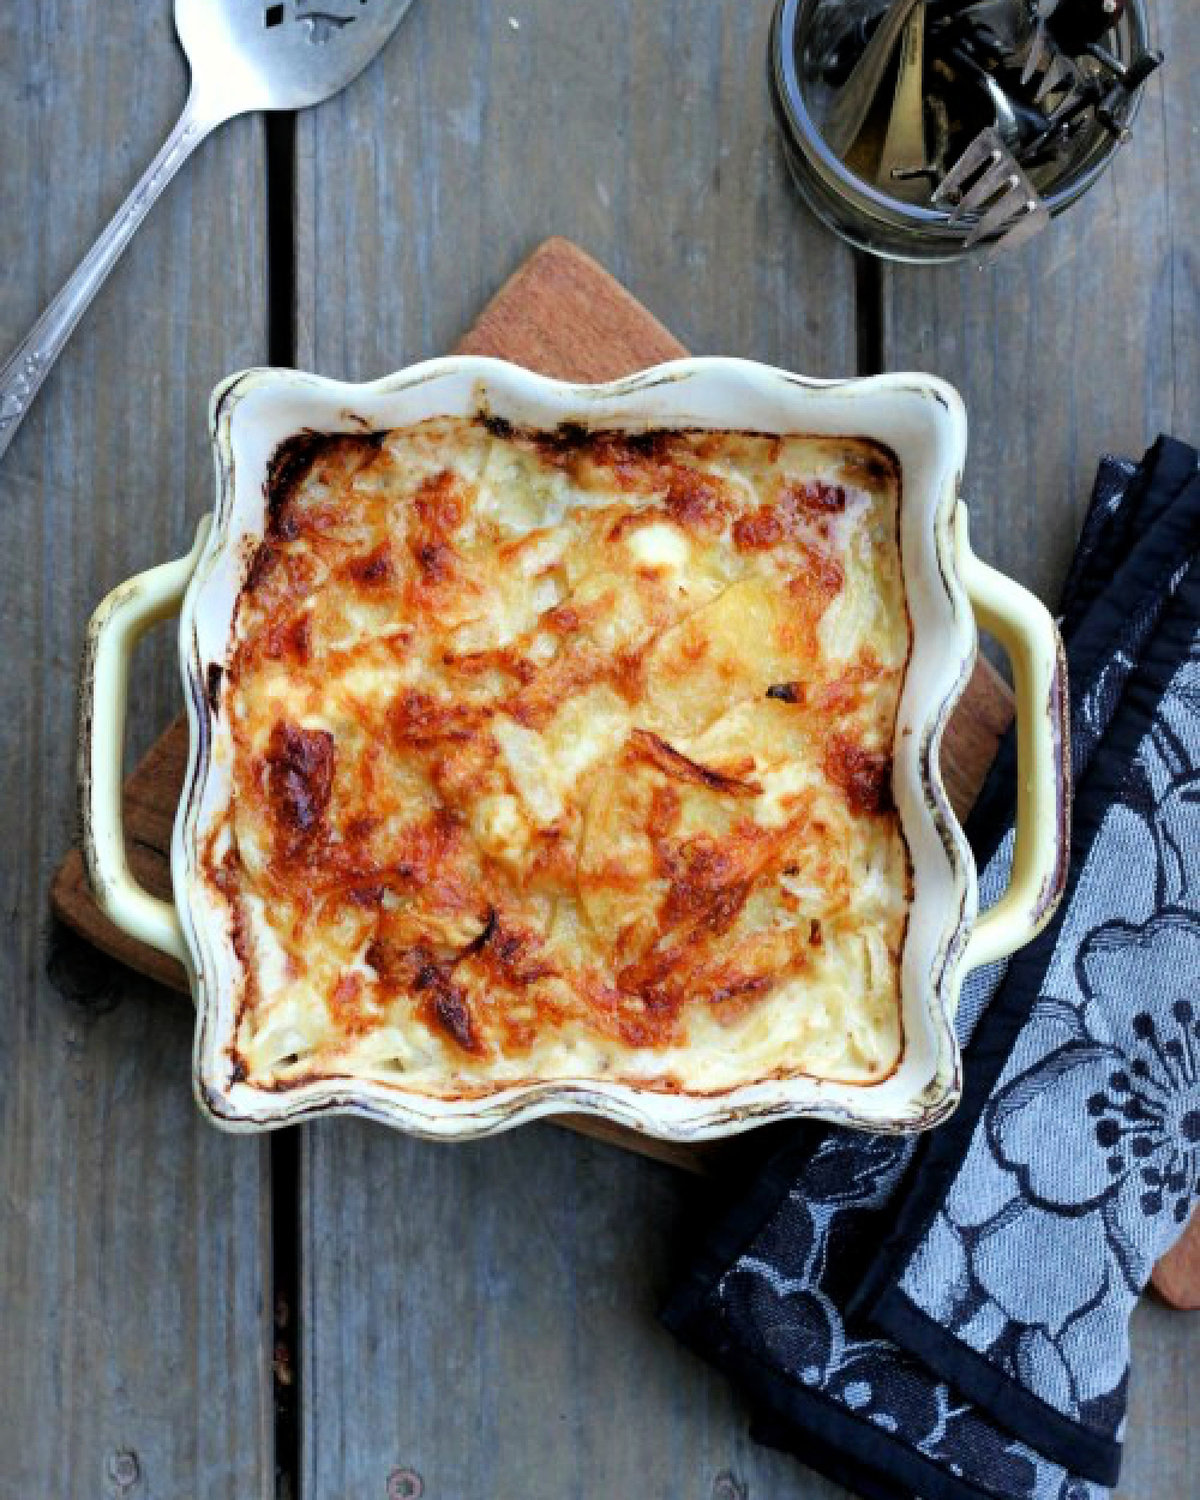 A potato gratin is a cheese lover’s gift, with ultrathin layers of sliced potatoes blanketed in oozing cheese, cream and, yes, more cheese.